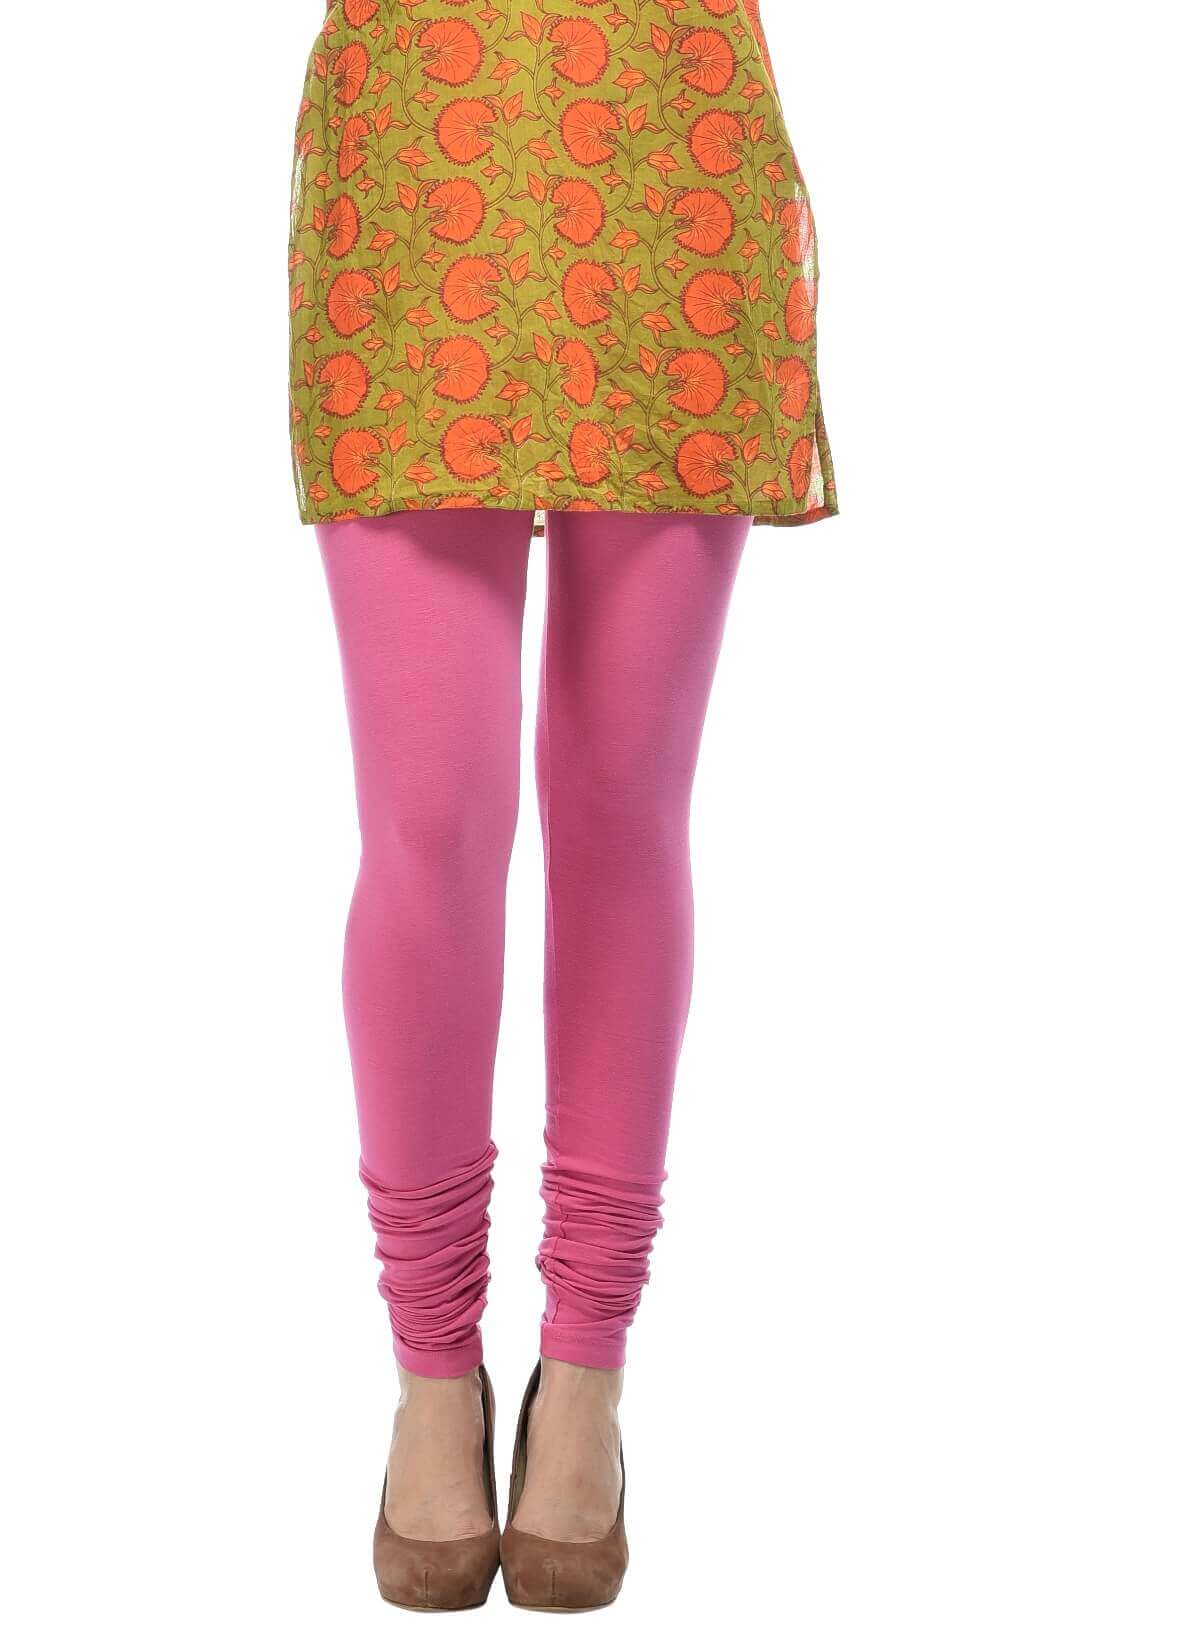 Ladies Printed Cotton Legging at Rs.180/Piece in kolkata offer by Ad Arcade